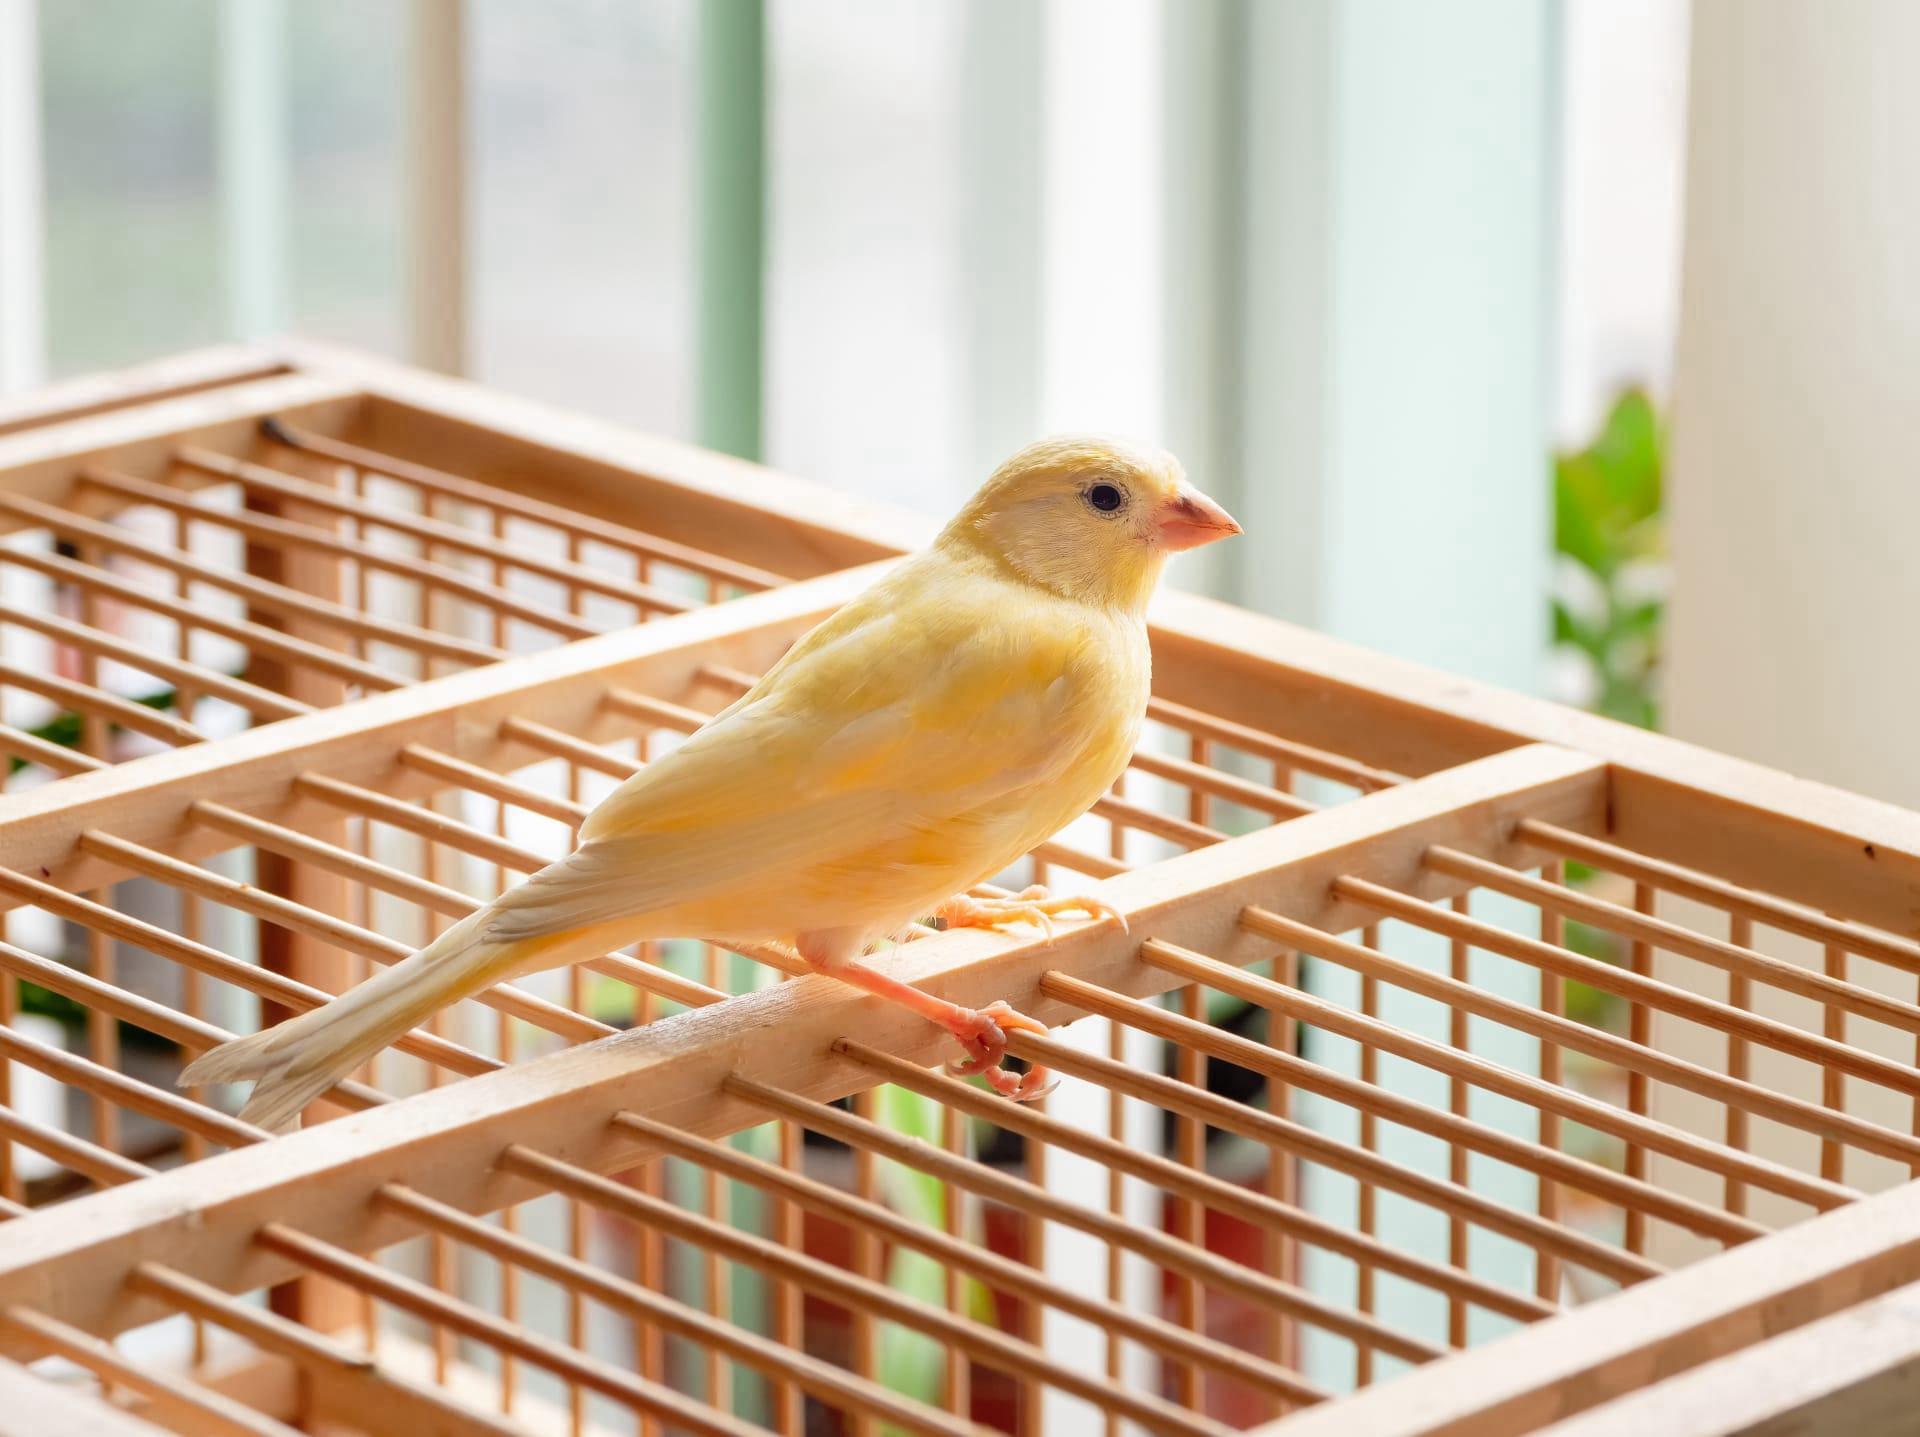 Canary pictures